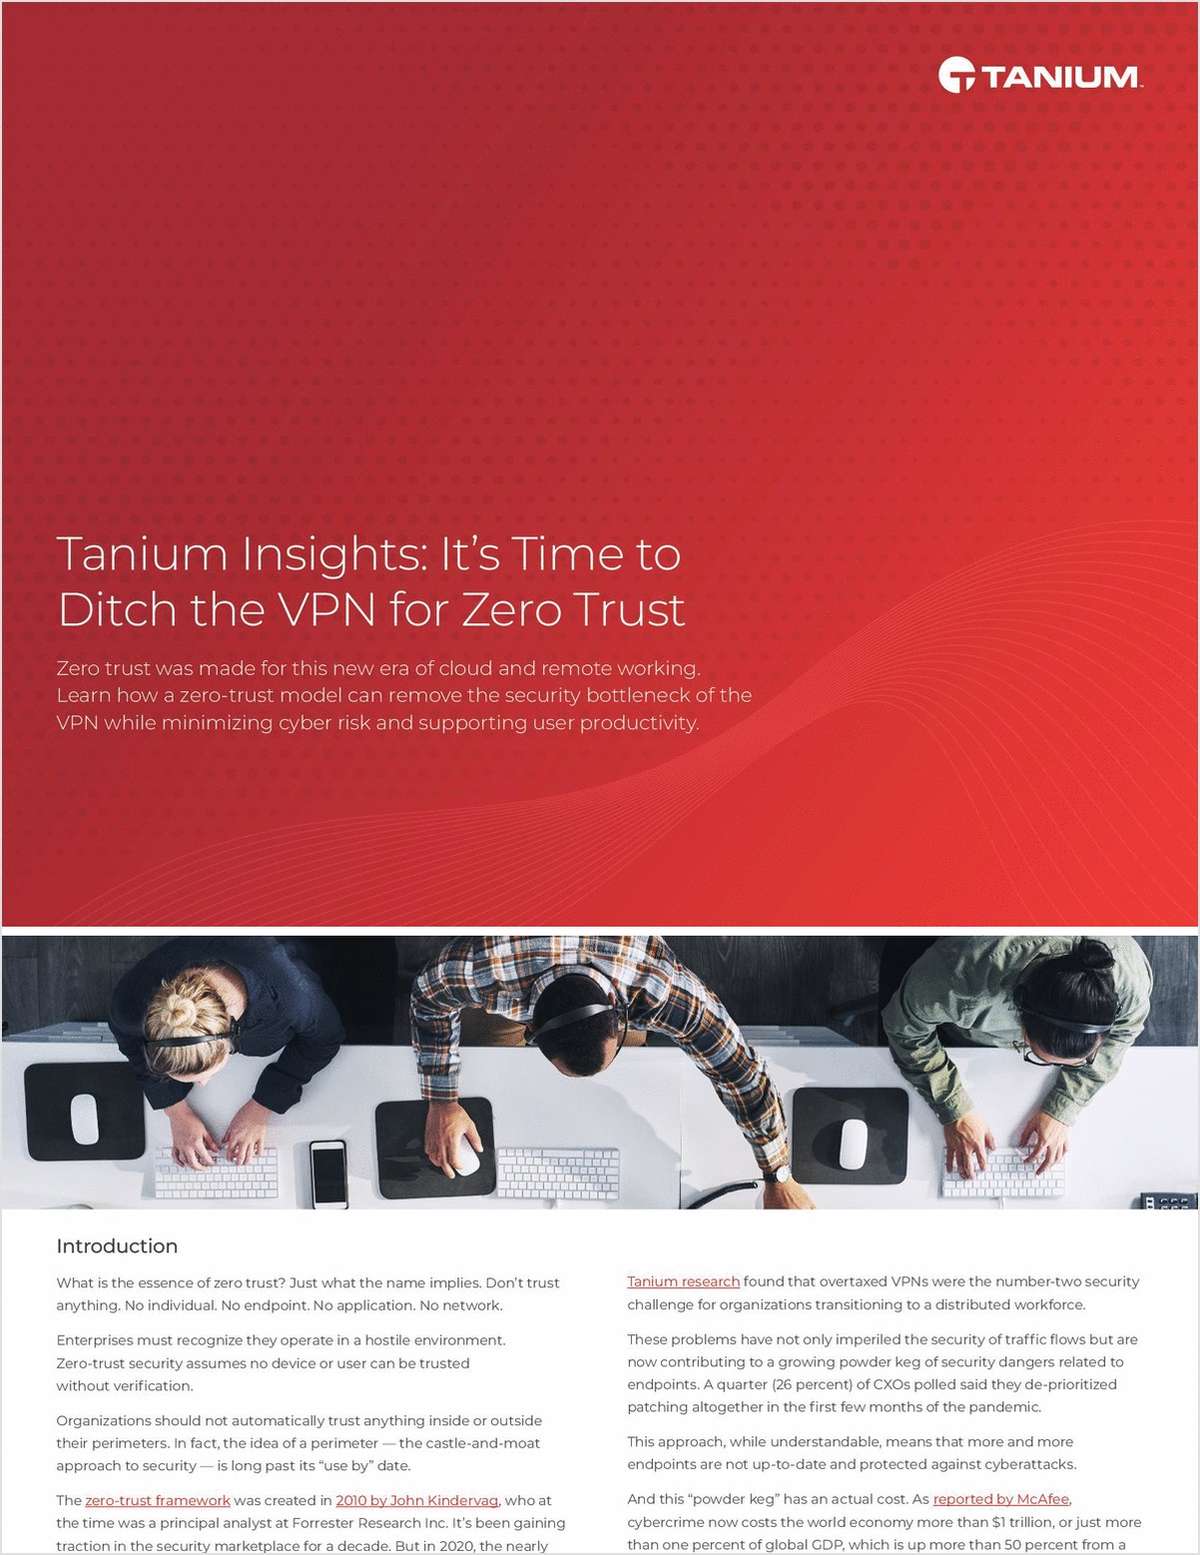 Tanium Insights: It's Time to Ditch the VPN for Zero Trust